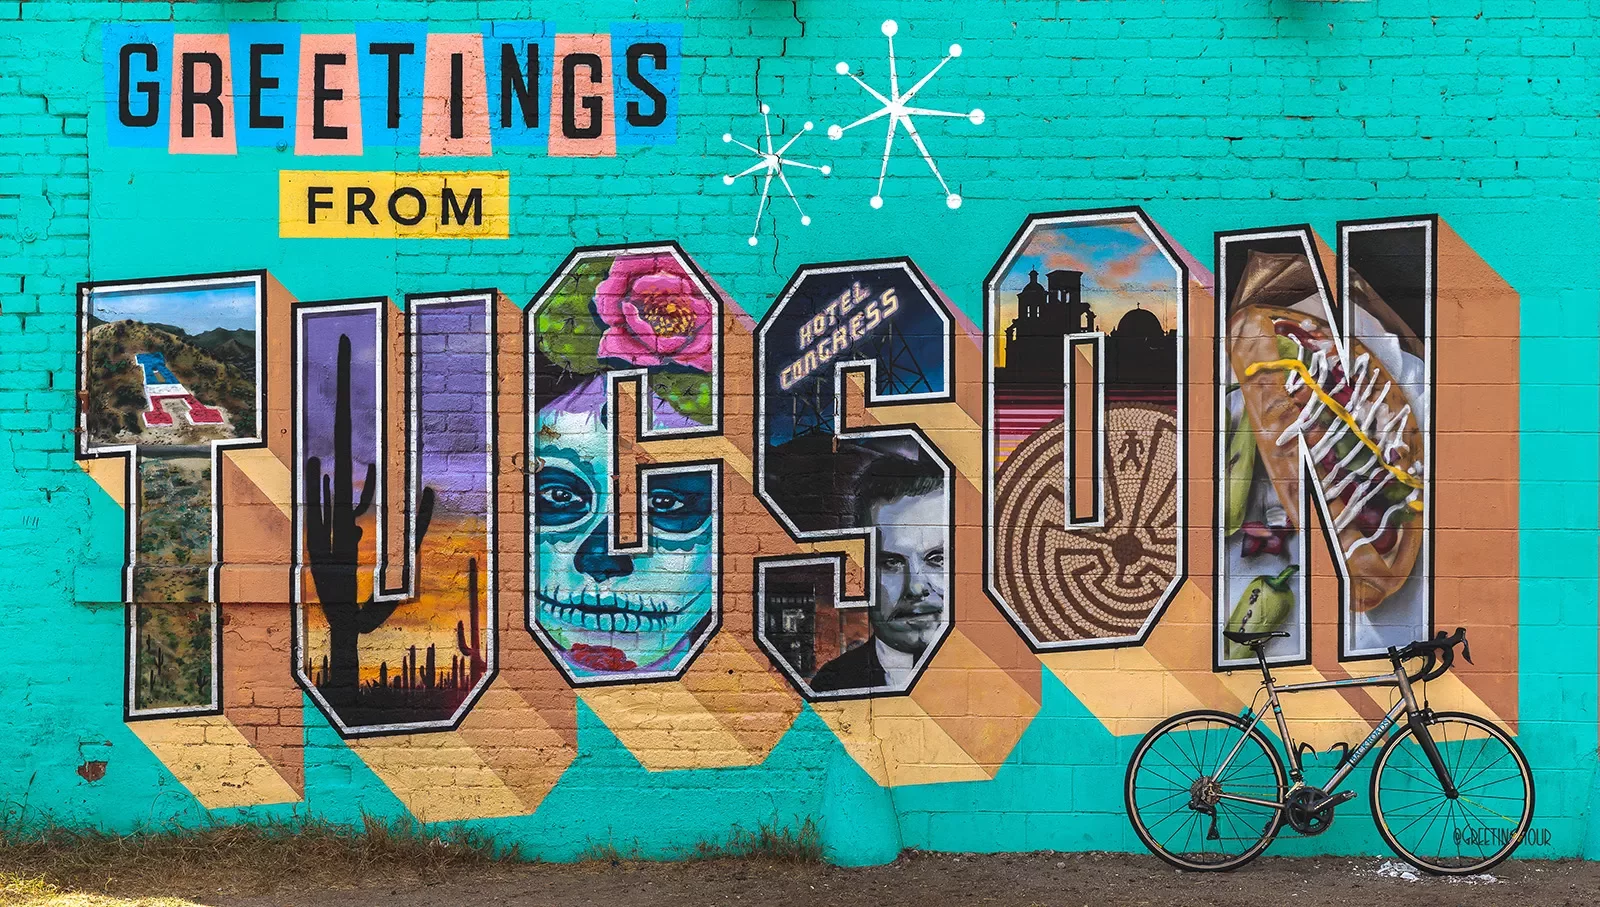 Greetings from Tuscon mural with Backroads bike